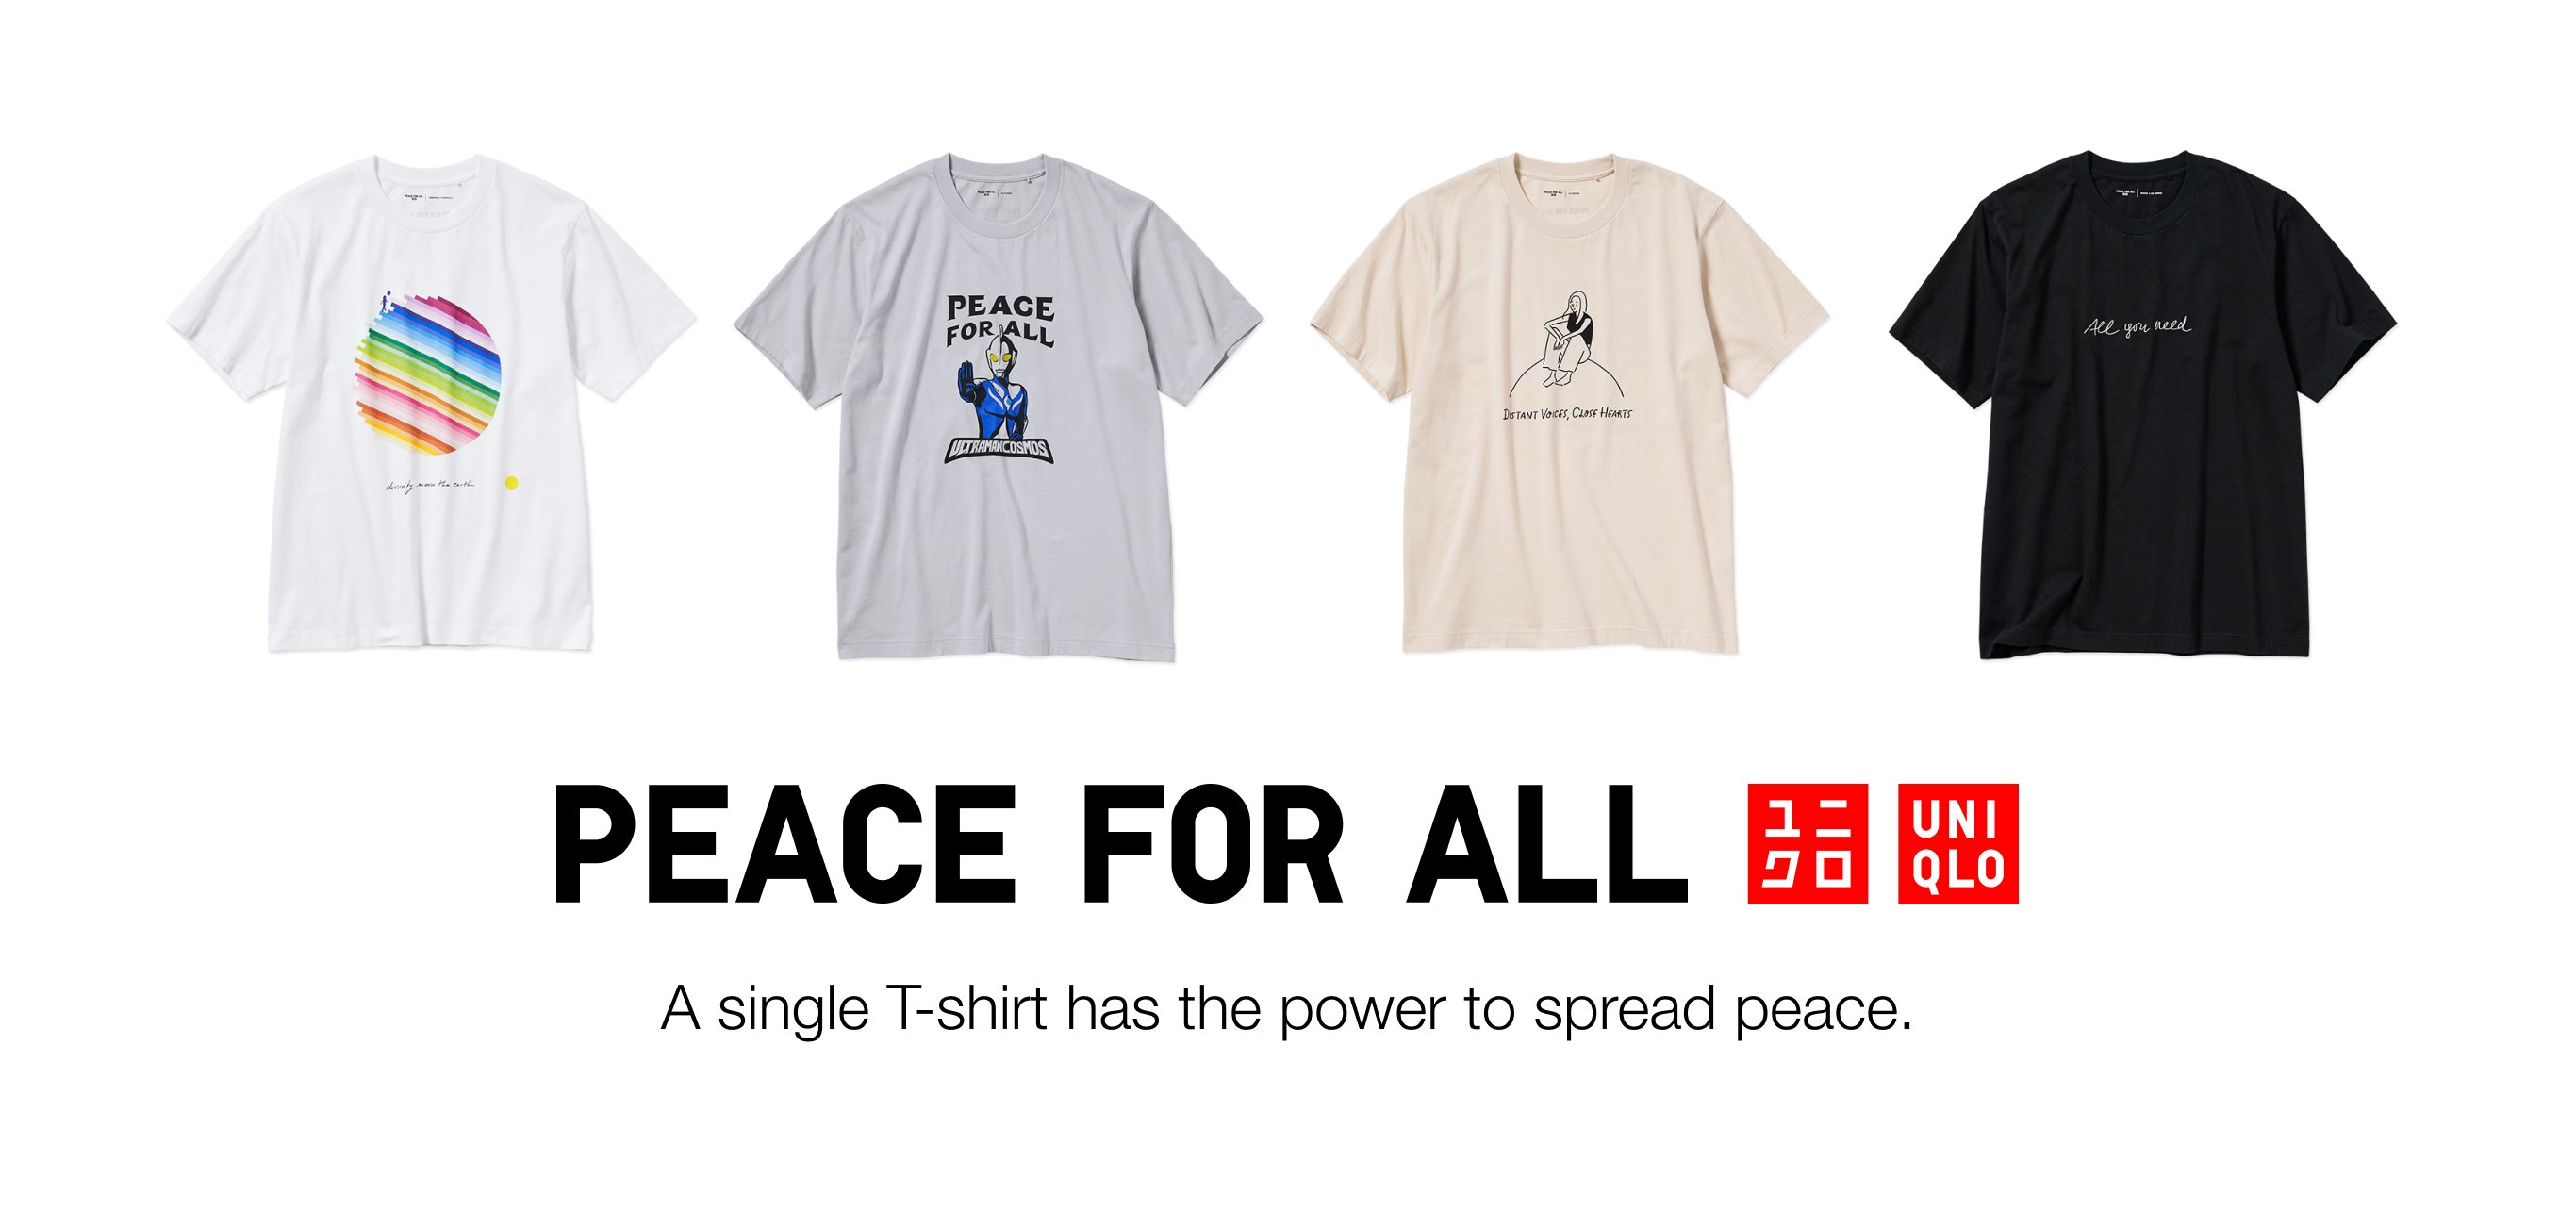 UNIQLO Launches Holiday Collection for PEACE FOR ALL Charity T